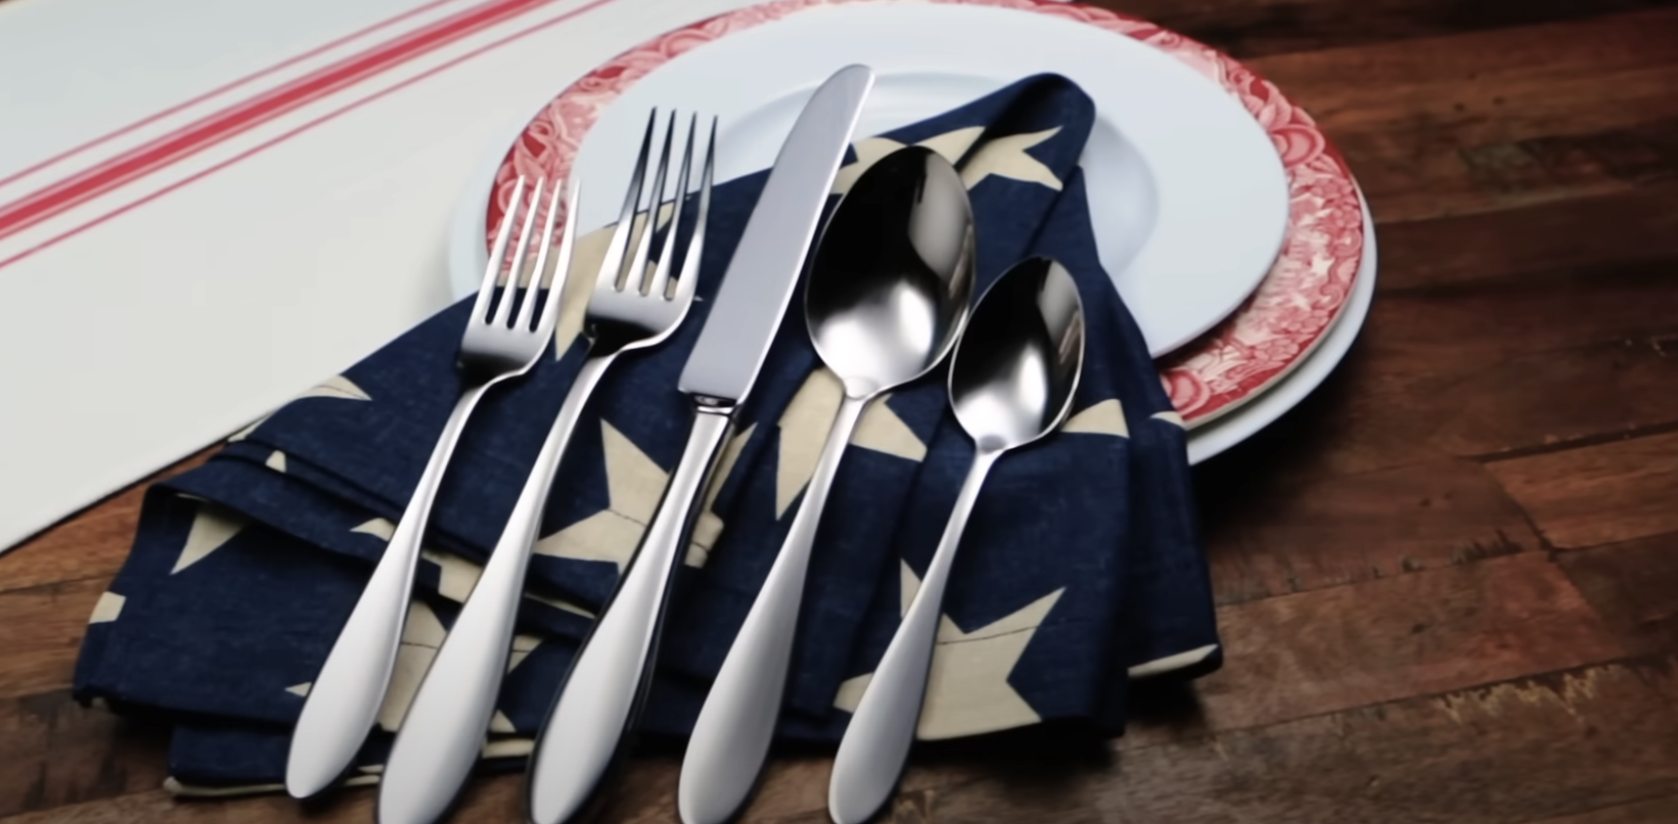 liberty tabletop forks and ...